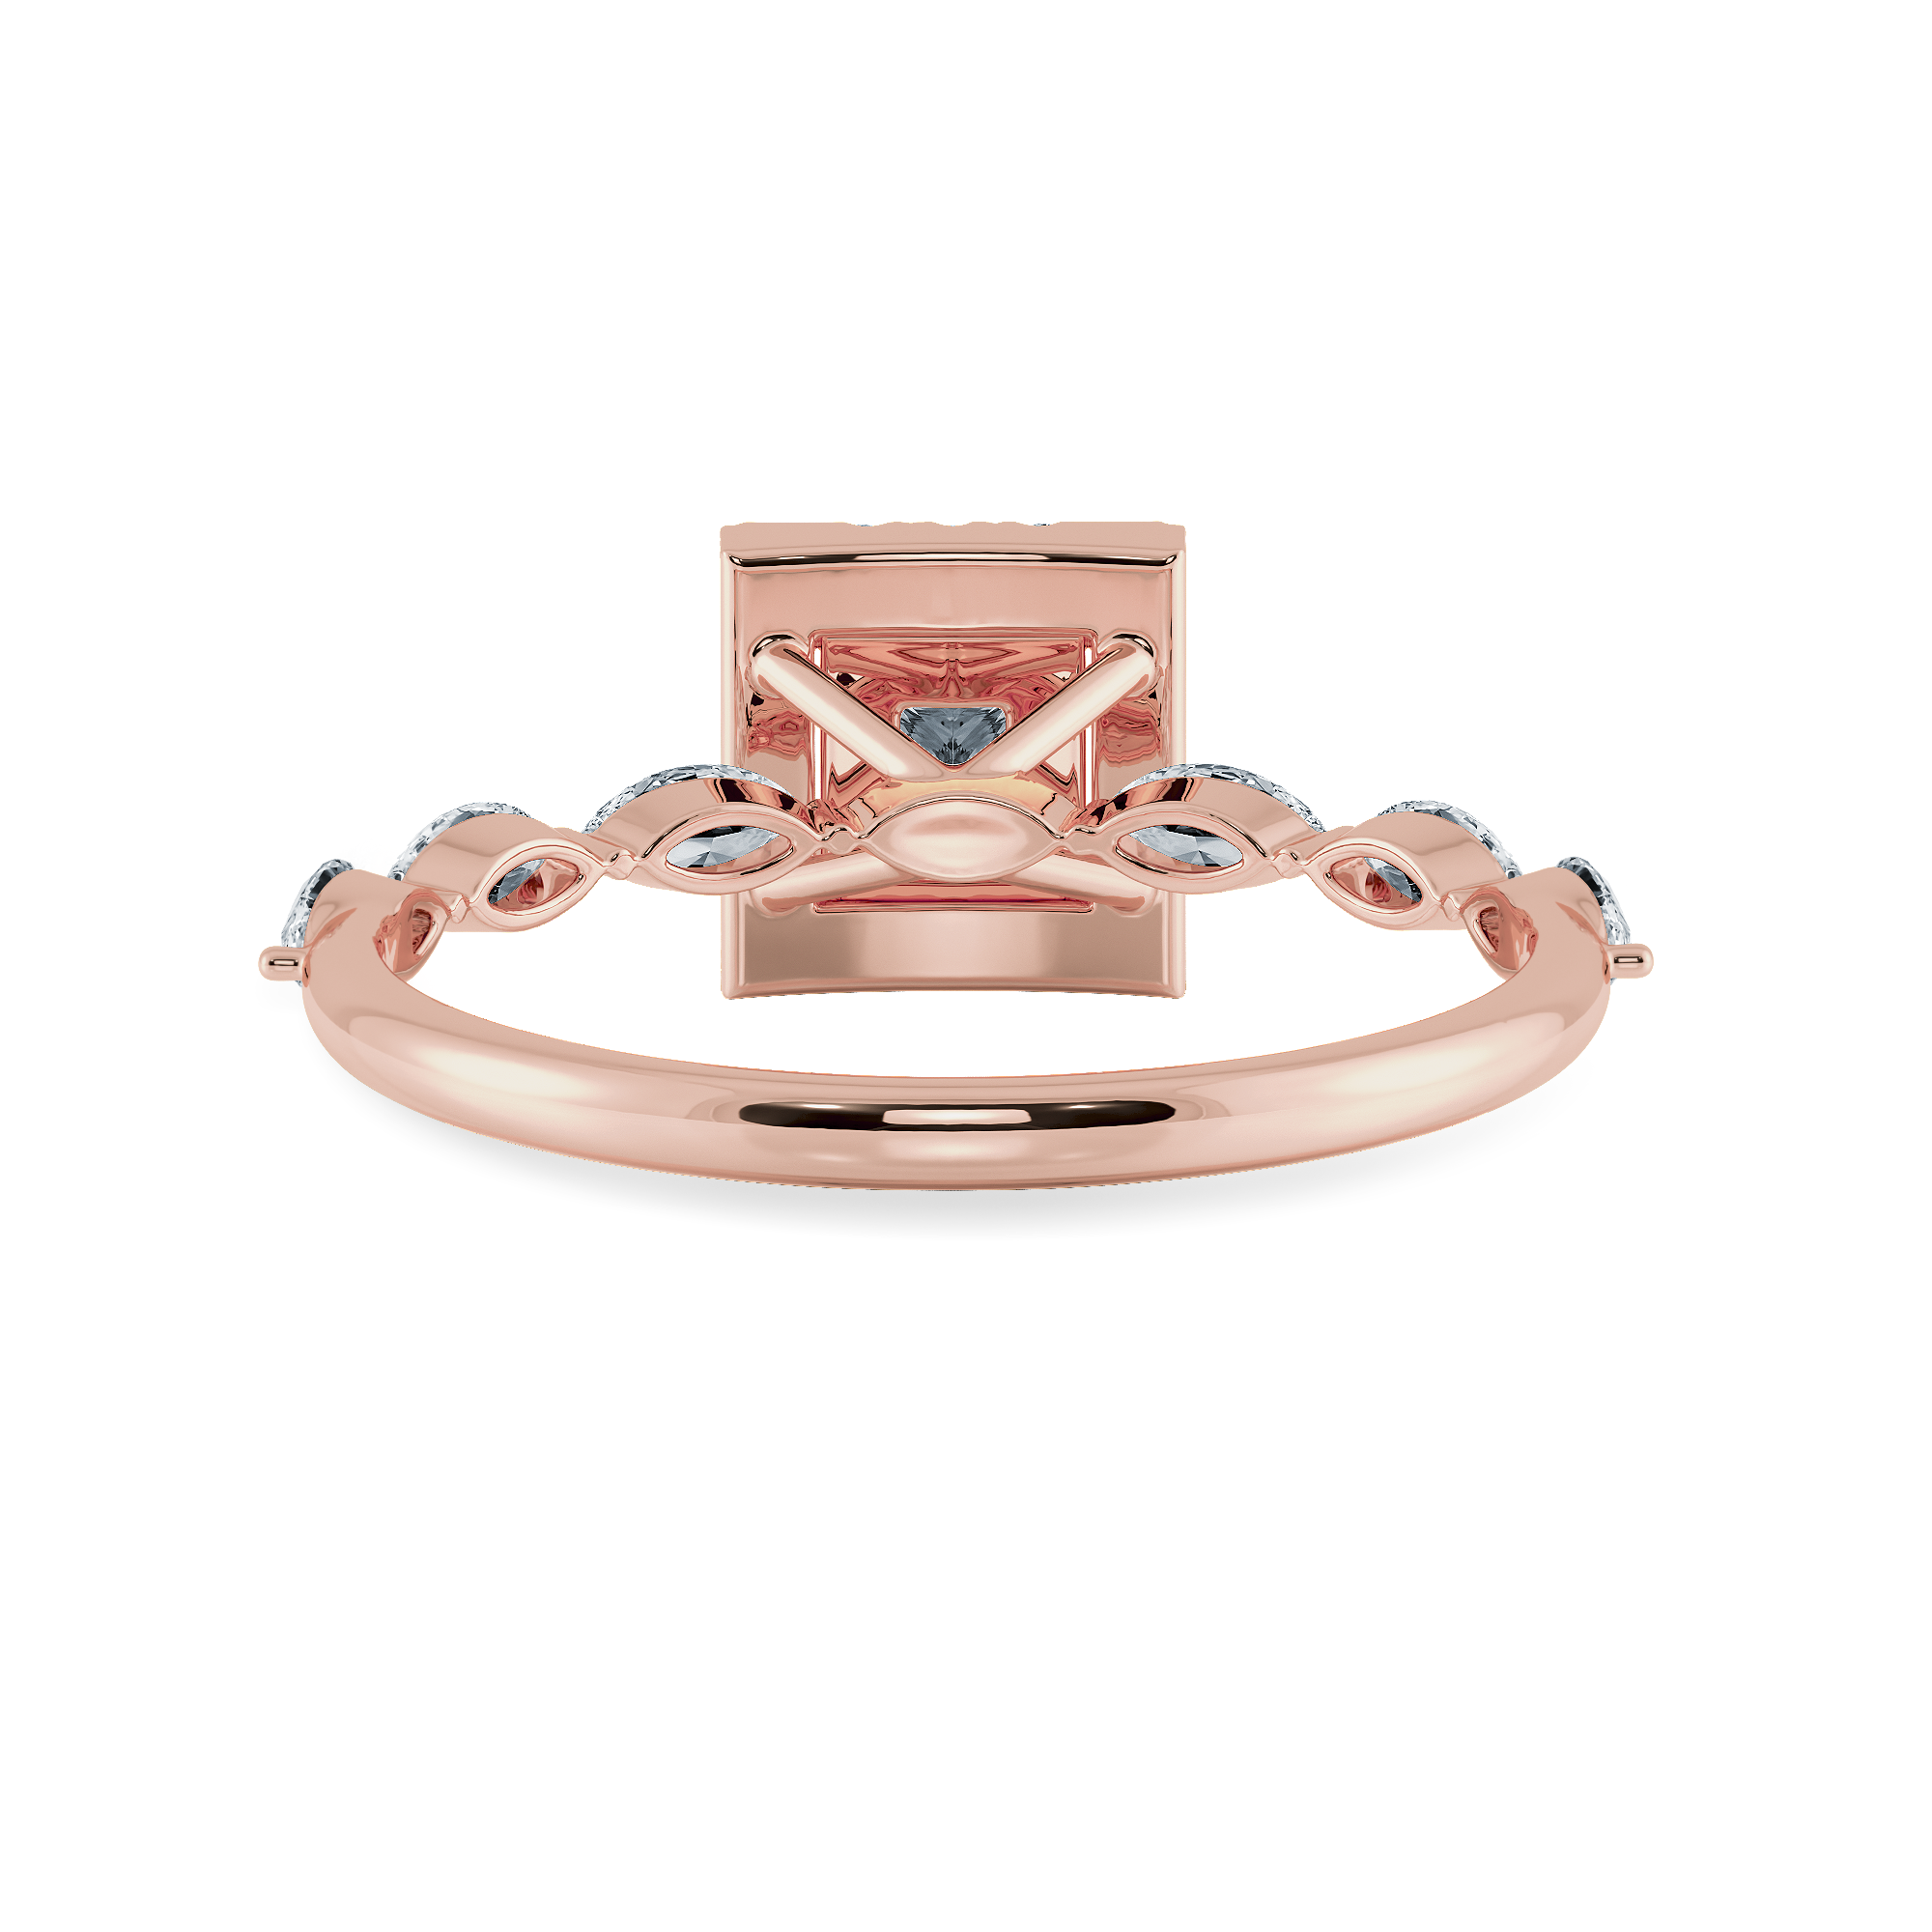 50-Pointer Princess Cut Solitaire Halo Diamond with Marquise Cut Diamond Accents 18K Rose Gold Ring JL AU 1277R-A   Jewelove.US